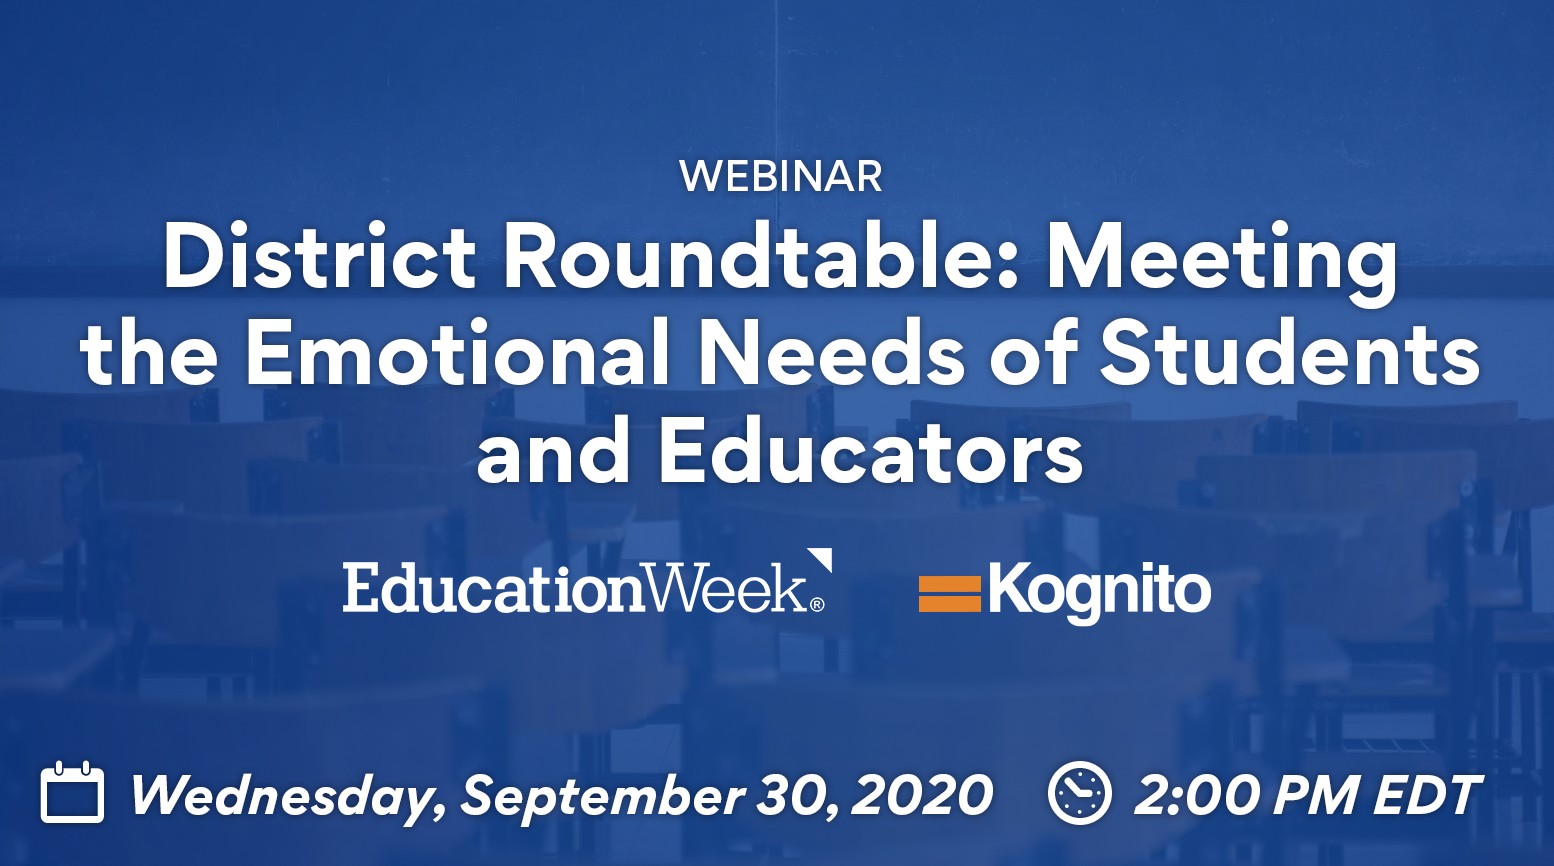 District Roundtable: Meeting the Emotional Needs of Students and Educators [Hosted by Education Week]